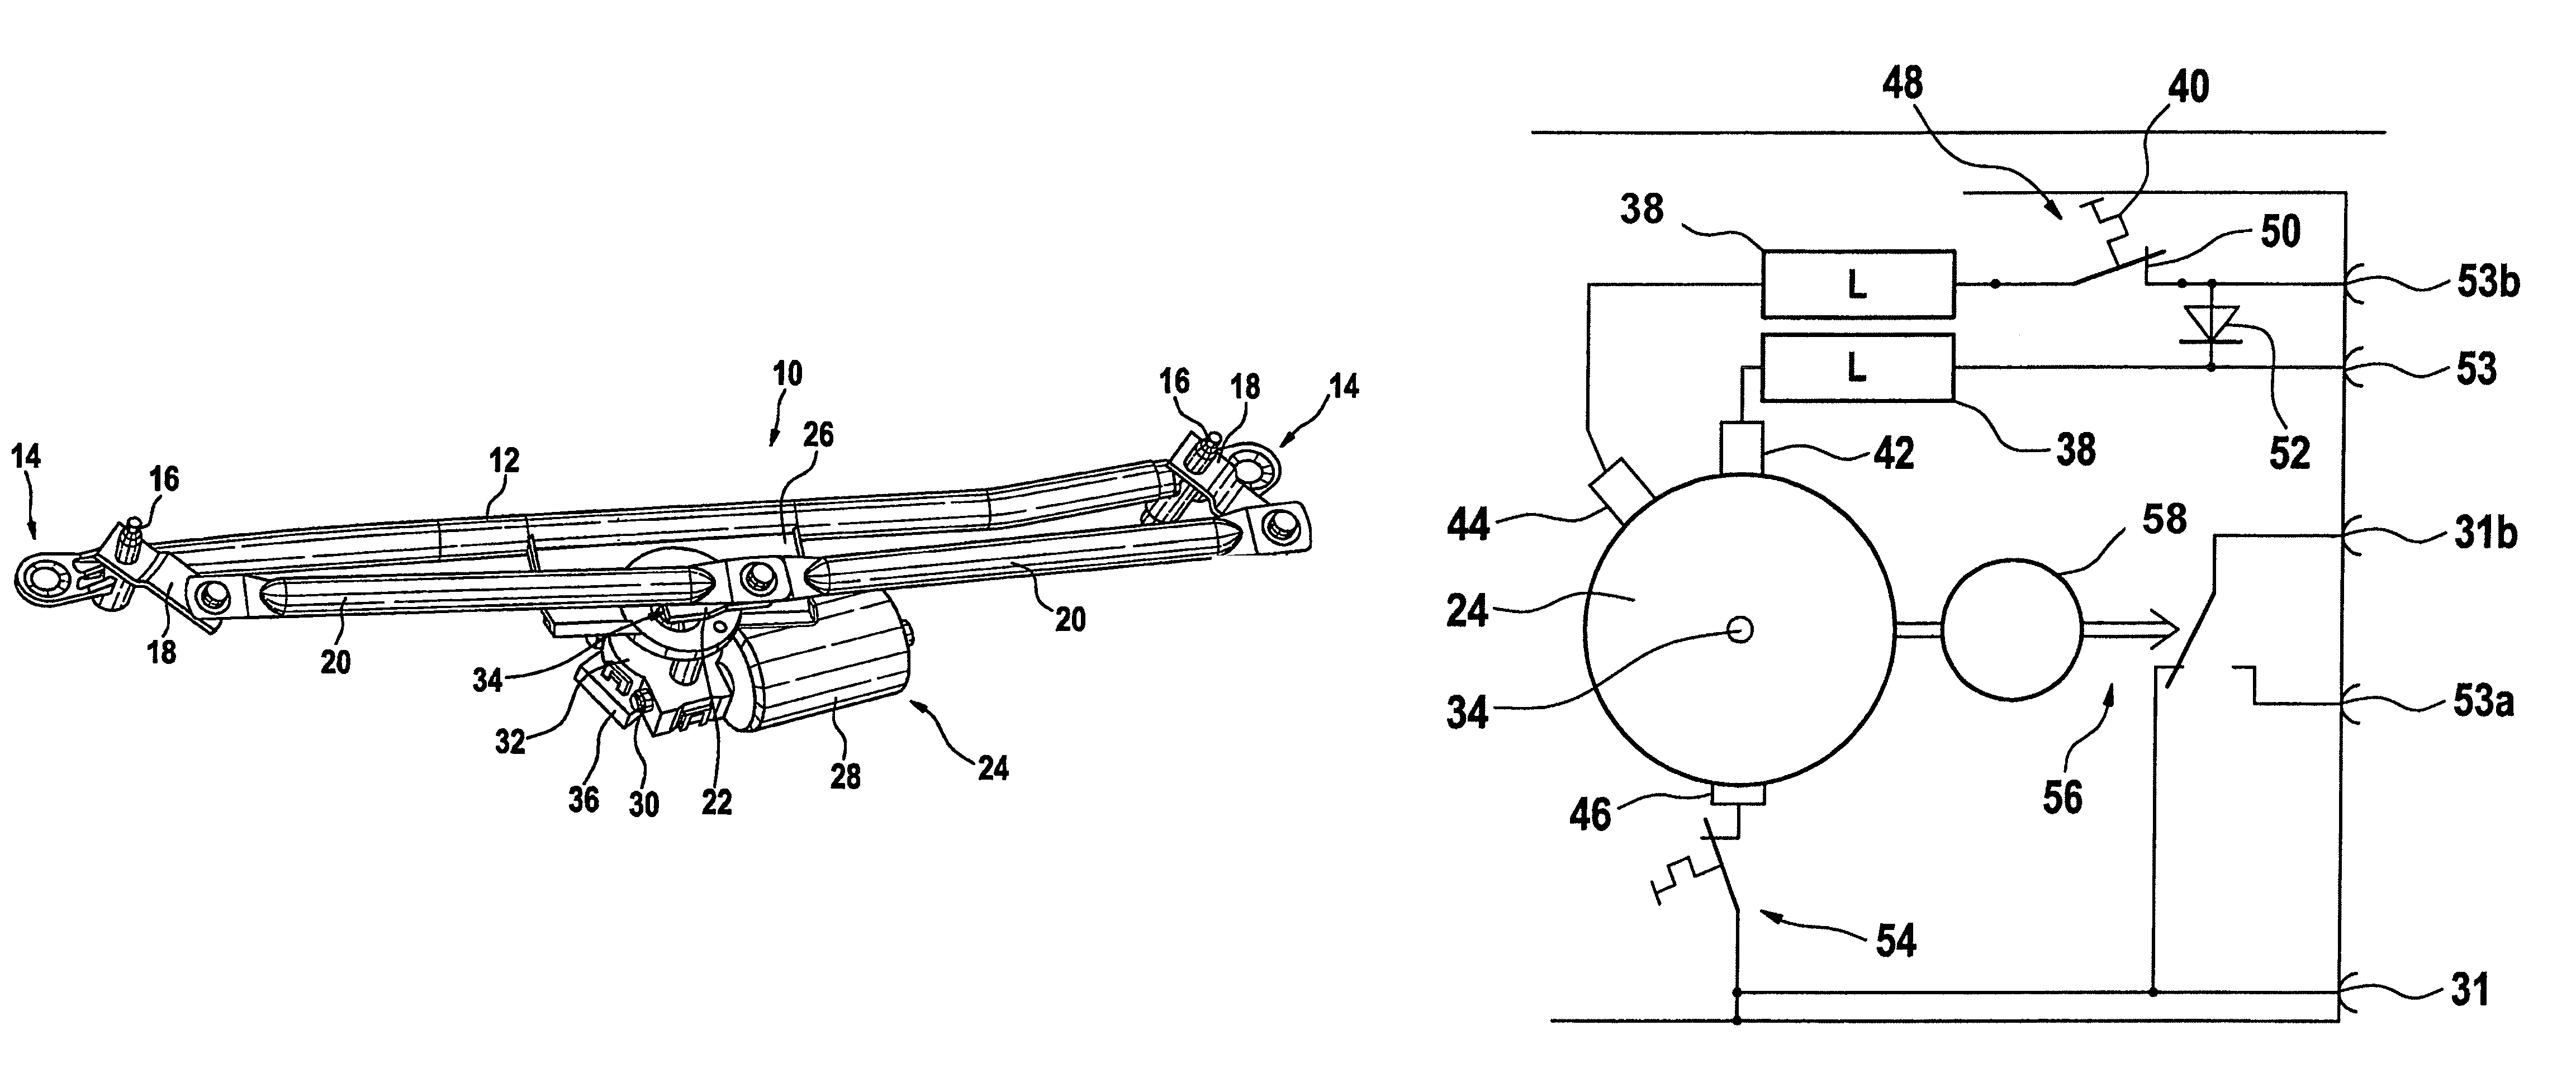 Windscreen wiper device, particularly for a motor vehicle